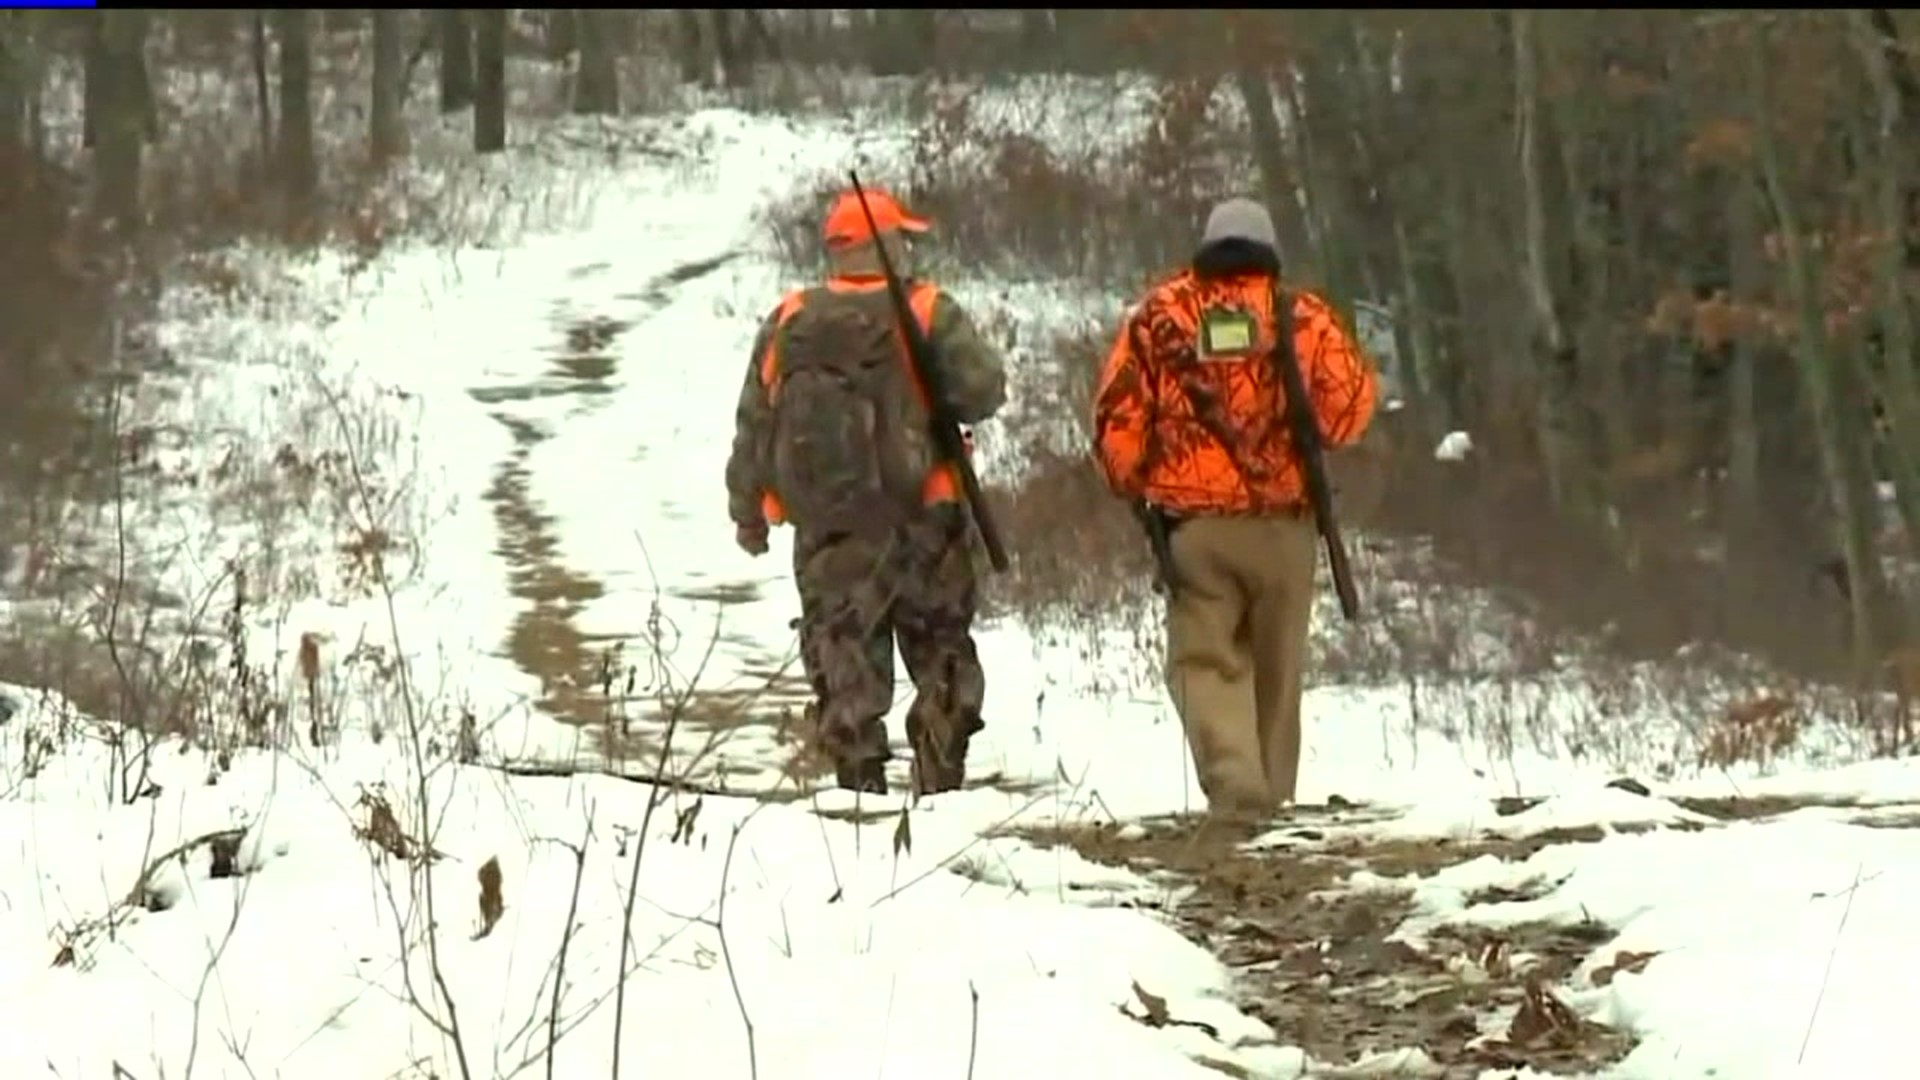 Changes could be coming to deer hunting in Pennsylvania this year, which would mean hunters could bag more doe and other antlerless deer than ever before.